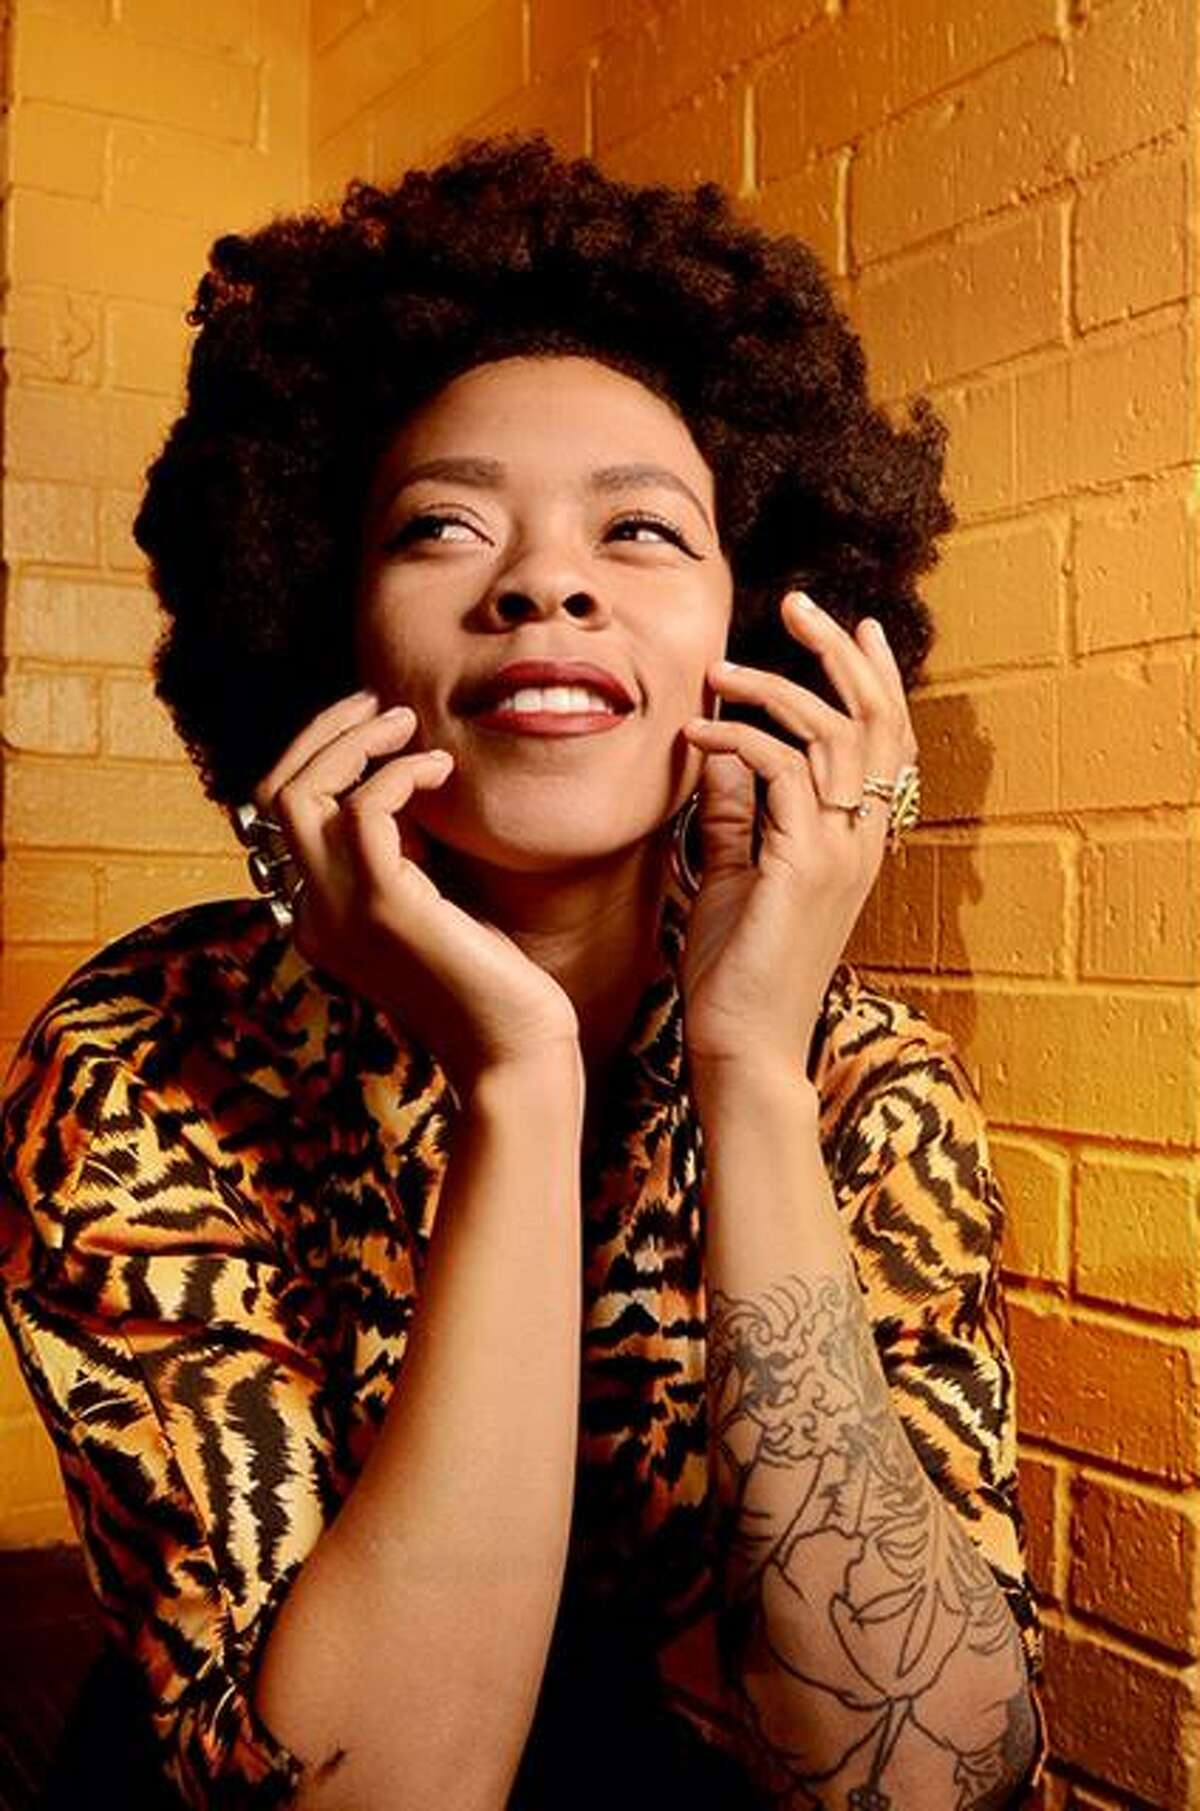 NIKKI HILL: North Carolina-raised rock vocalist/lyricist/bandleader Nikki Hill will perform a matinee show at Cafe Nine in New Haven at 4 p.m. Sunday. Tickets are $17 in advance, $20 at the door for the 21-plus show. Tickets are at https://nikkihill.bpt.me/